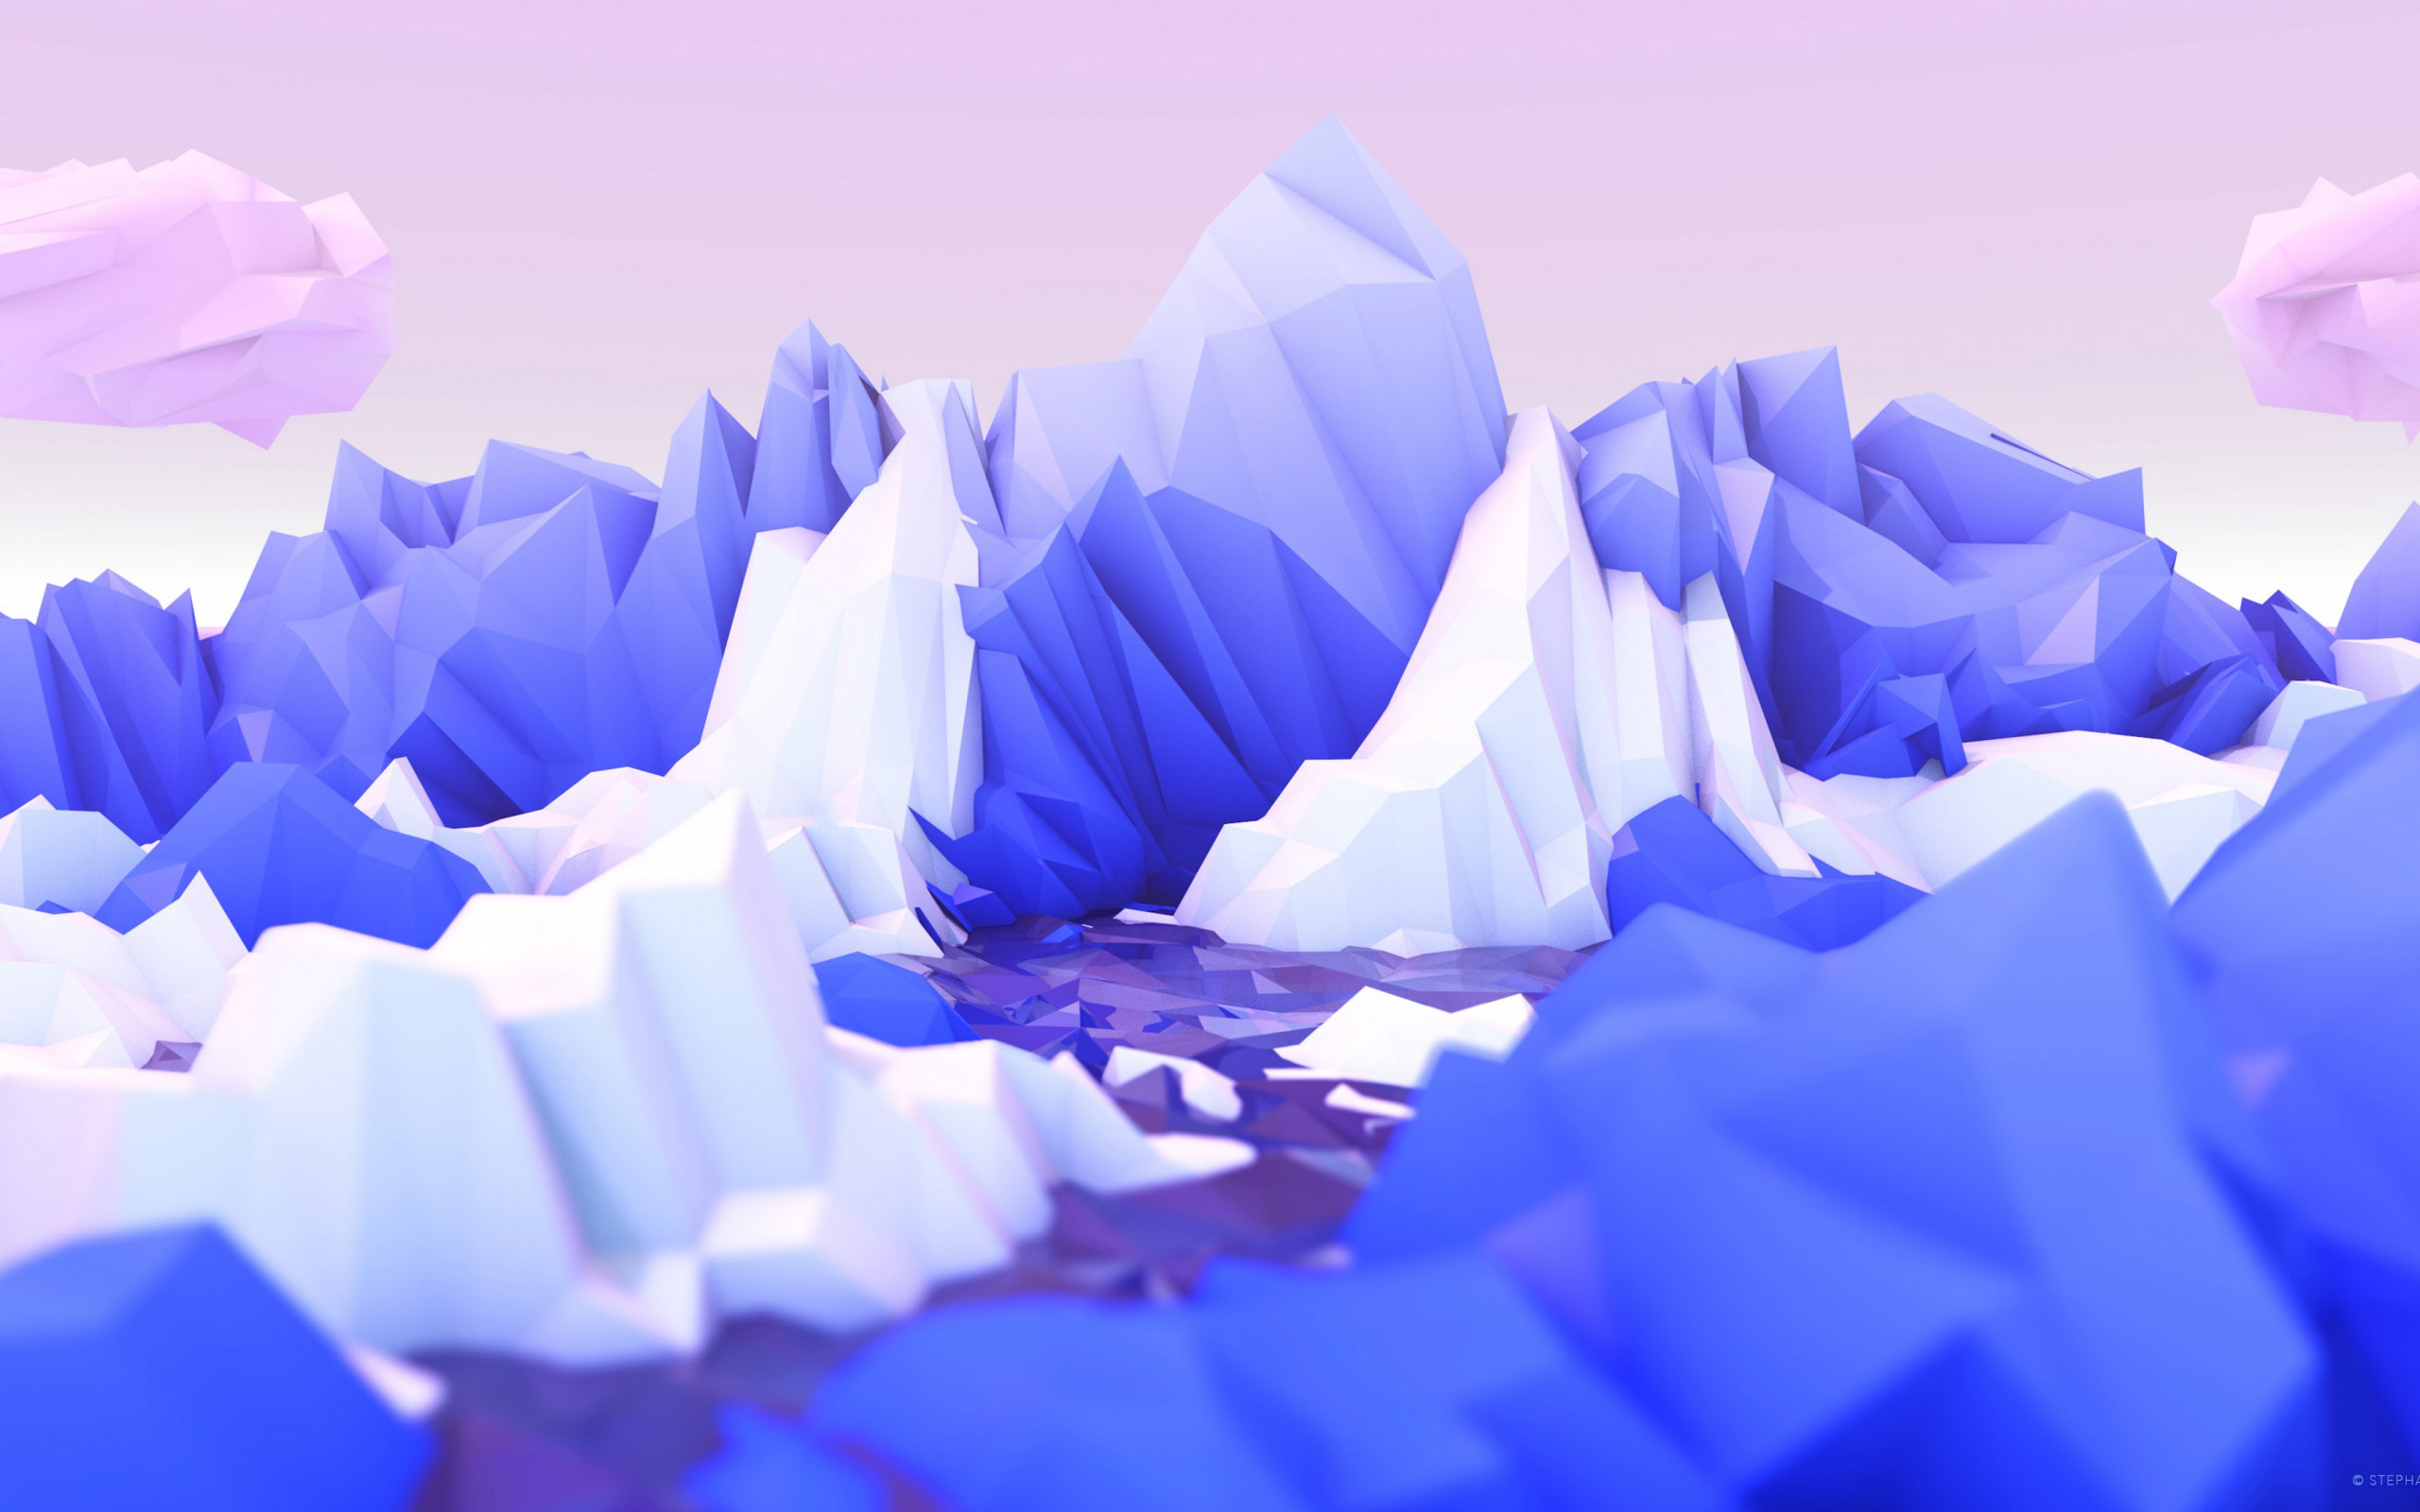 Low poly graphic design wallpaper 2560x1600